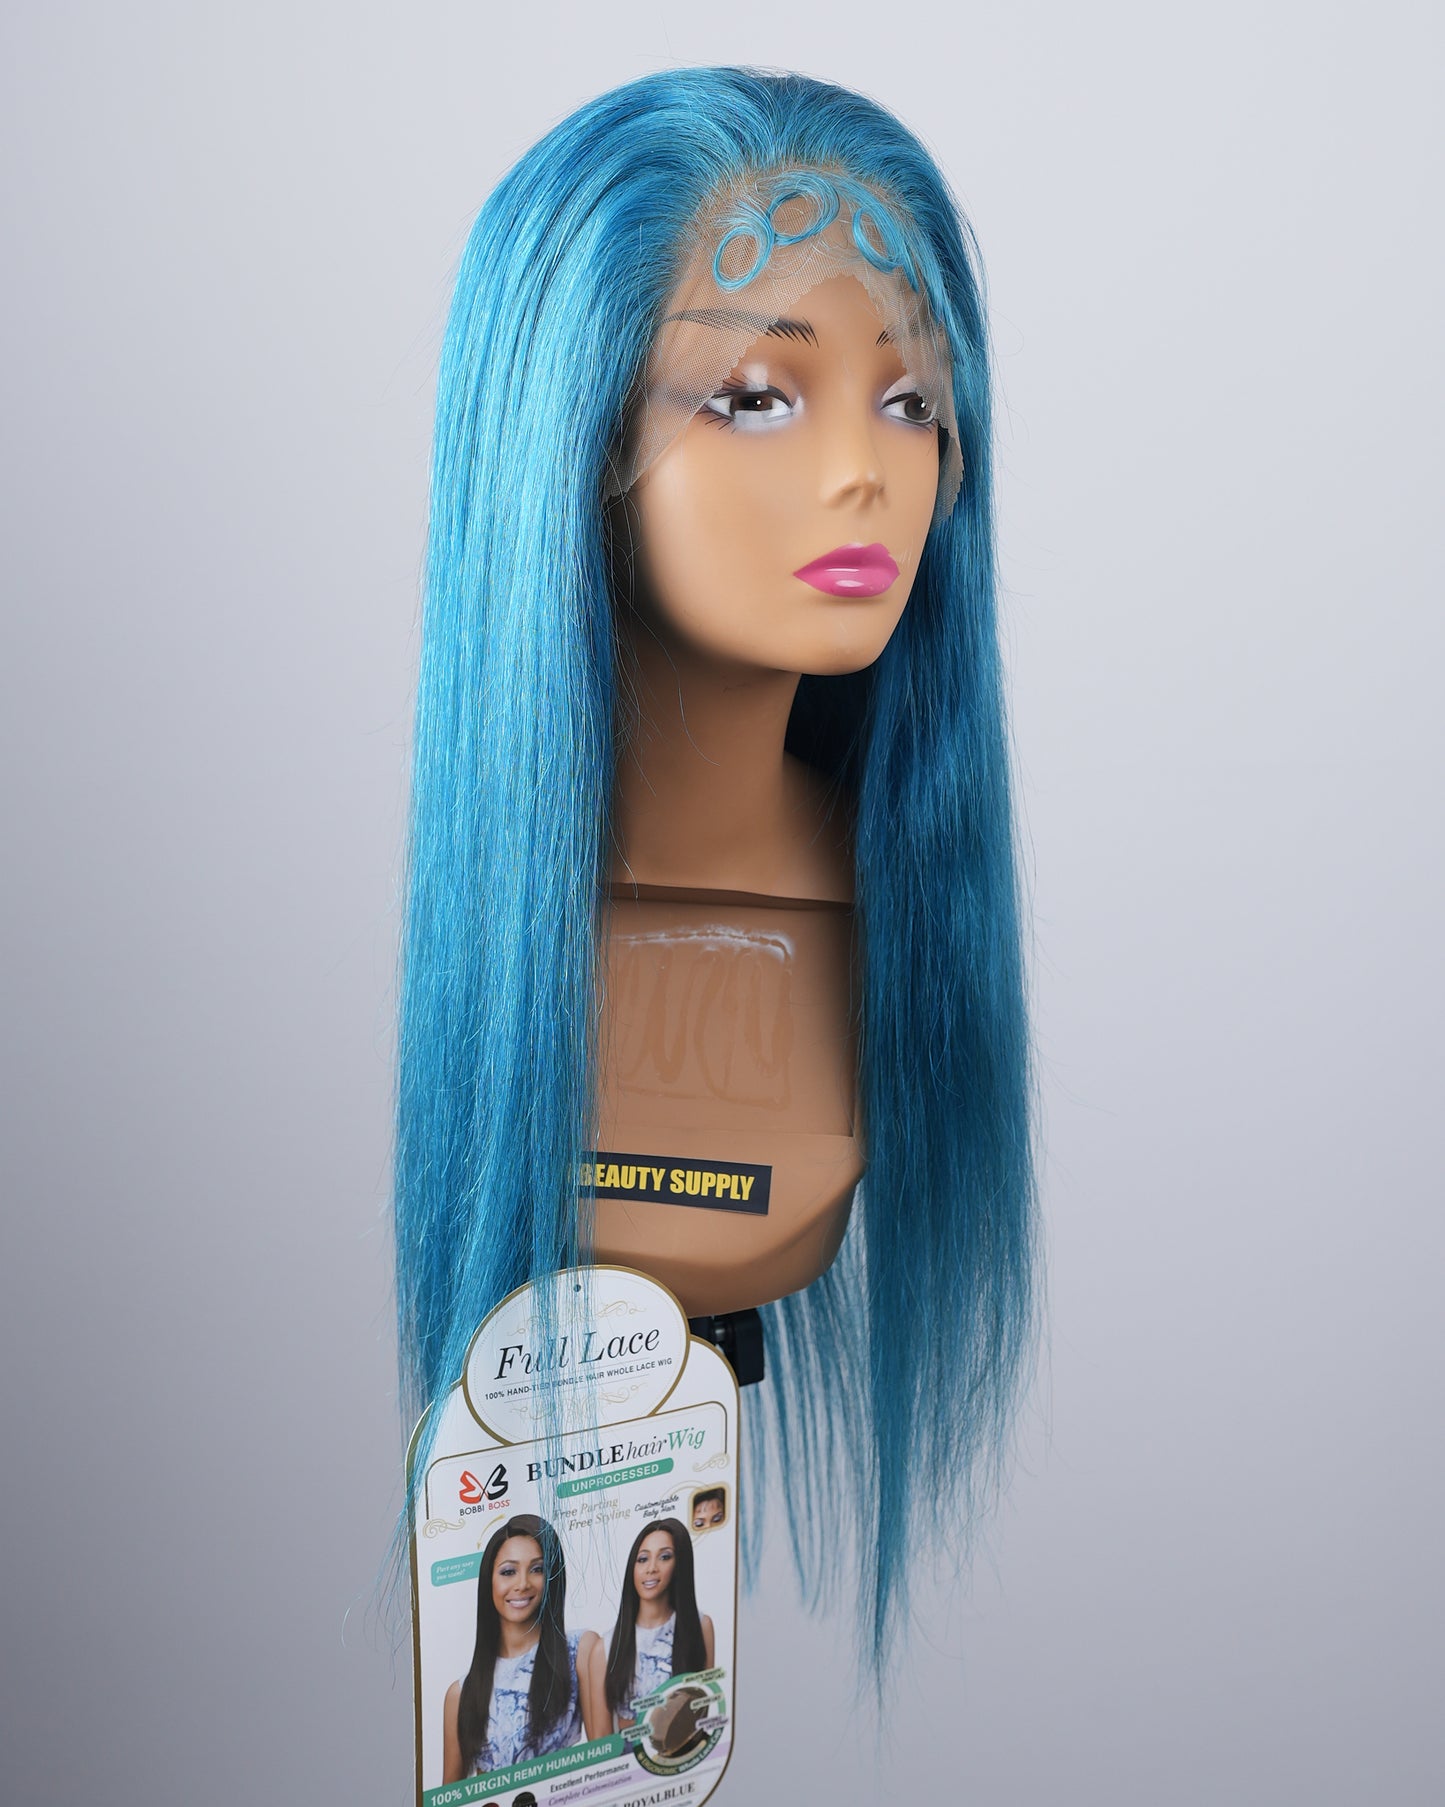 24 INCH Bobbi Boss® BNGLWST FULL LACE 100% Hand-Tied Bundle Hair whole Lace Virgin Remi Human Hair Wig (Blue)